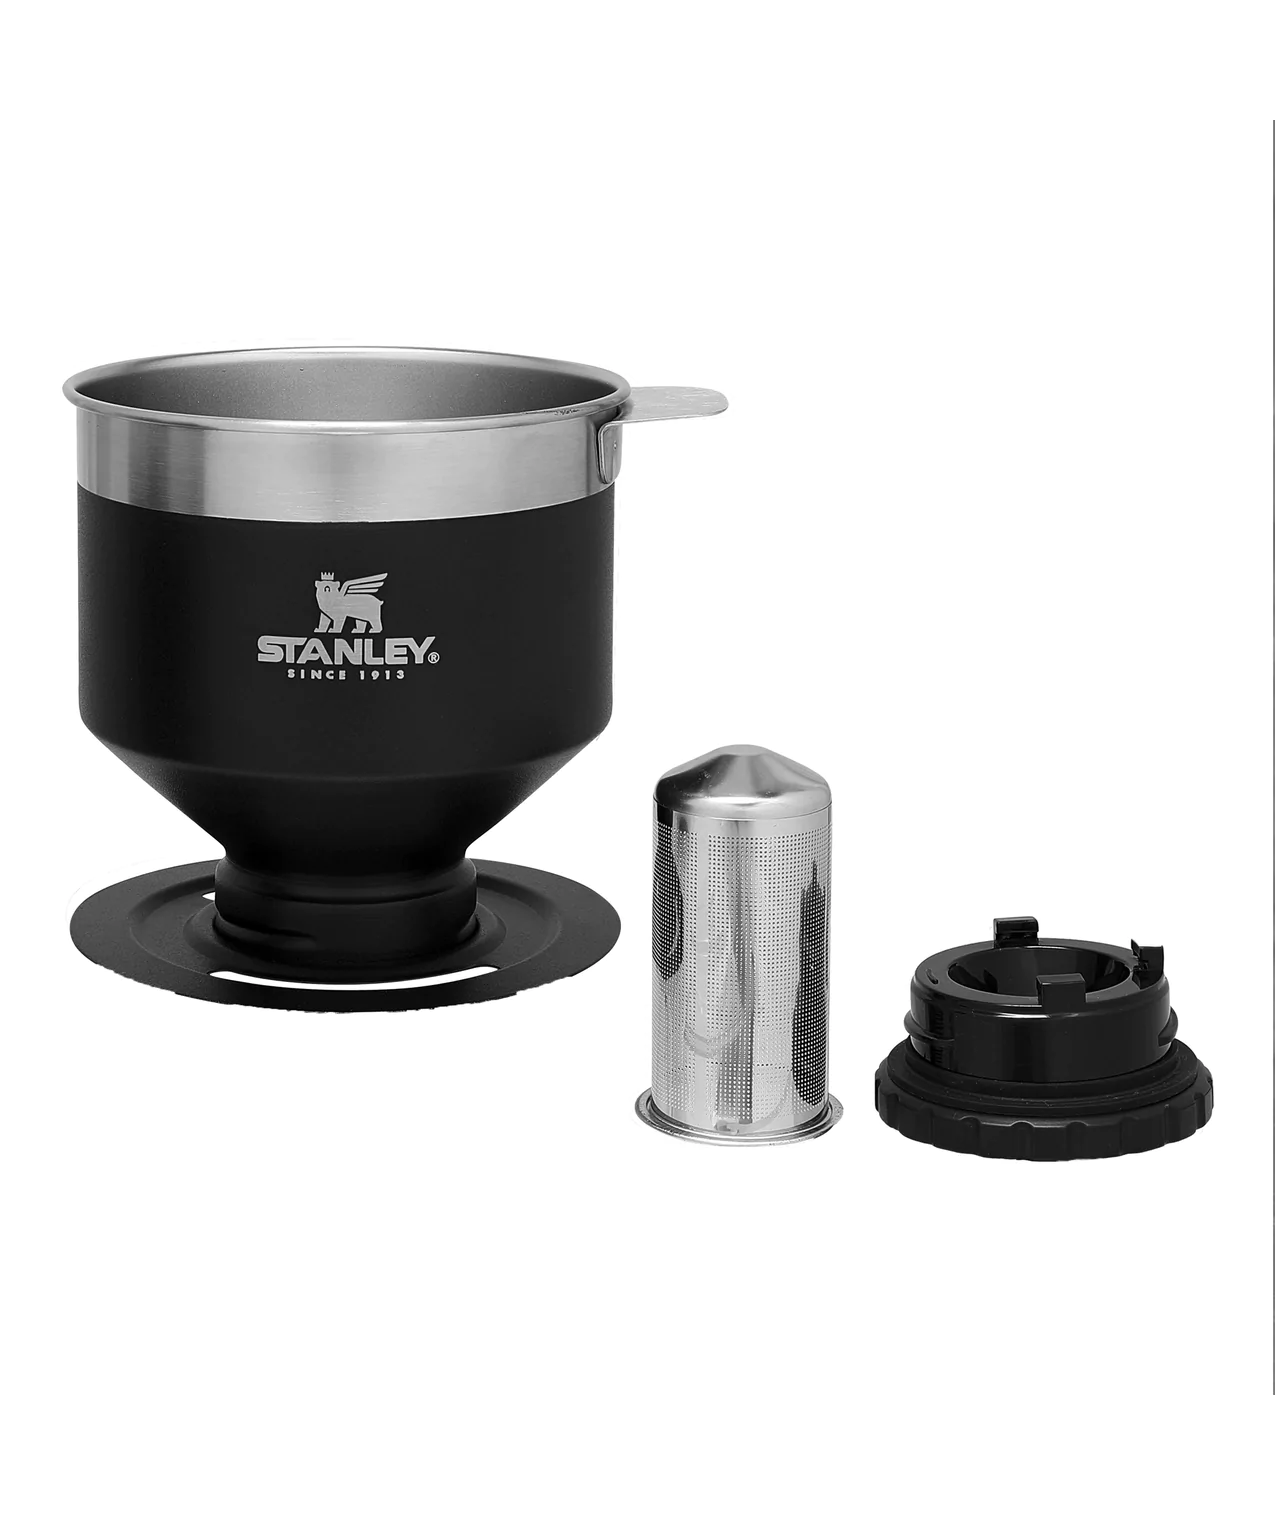 Stanley Camp Pour over Coffee Brewer Set, Includes Legendary Camp